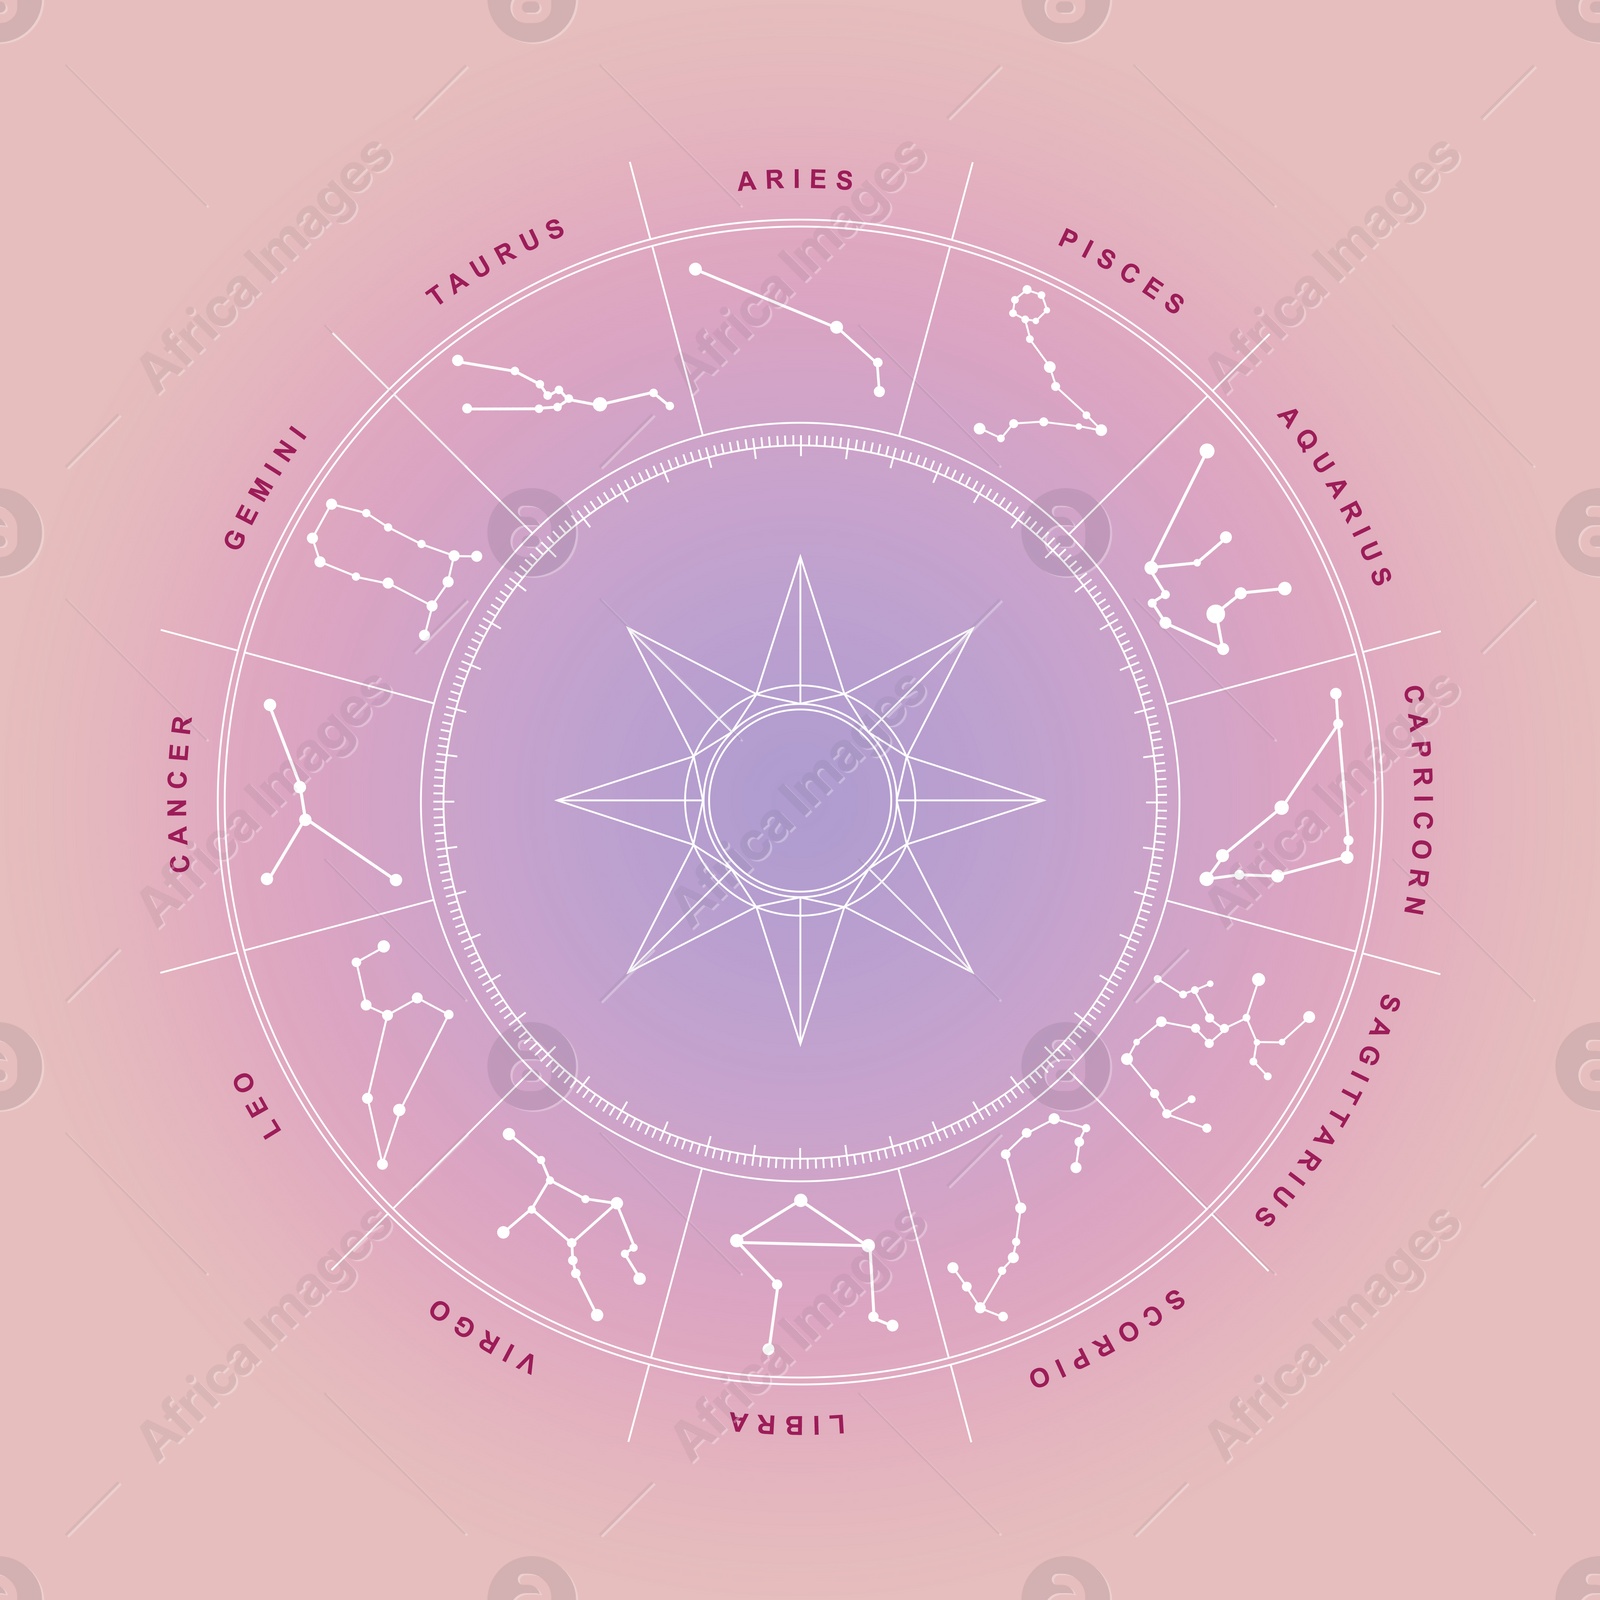 Illustration of Zodiac wheel with astrological signs on pink purple gradient background